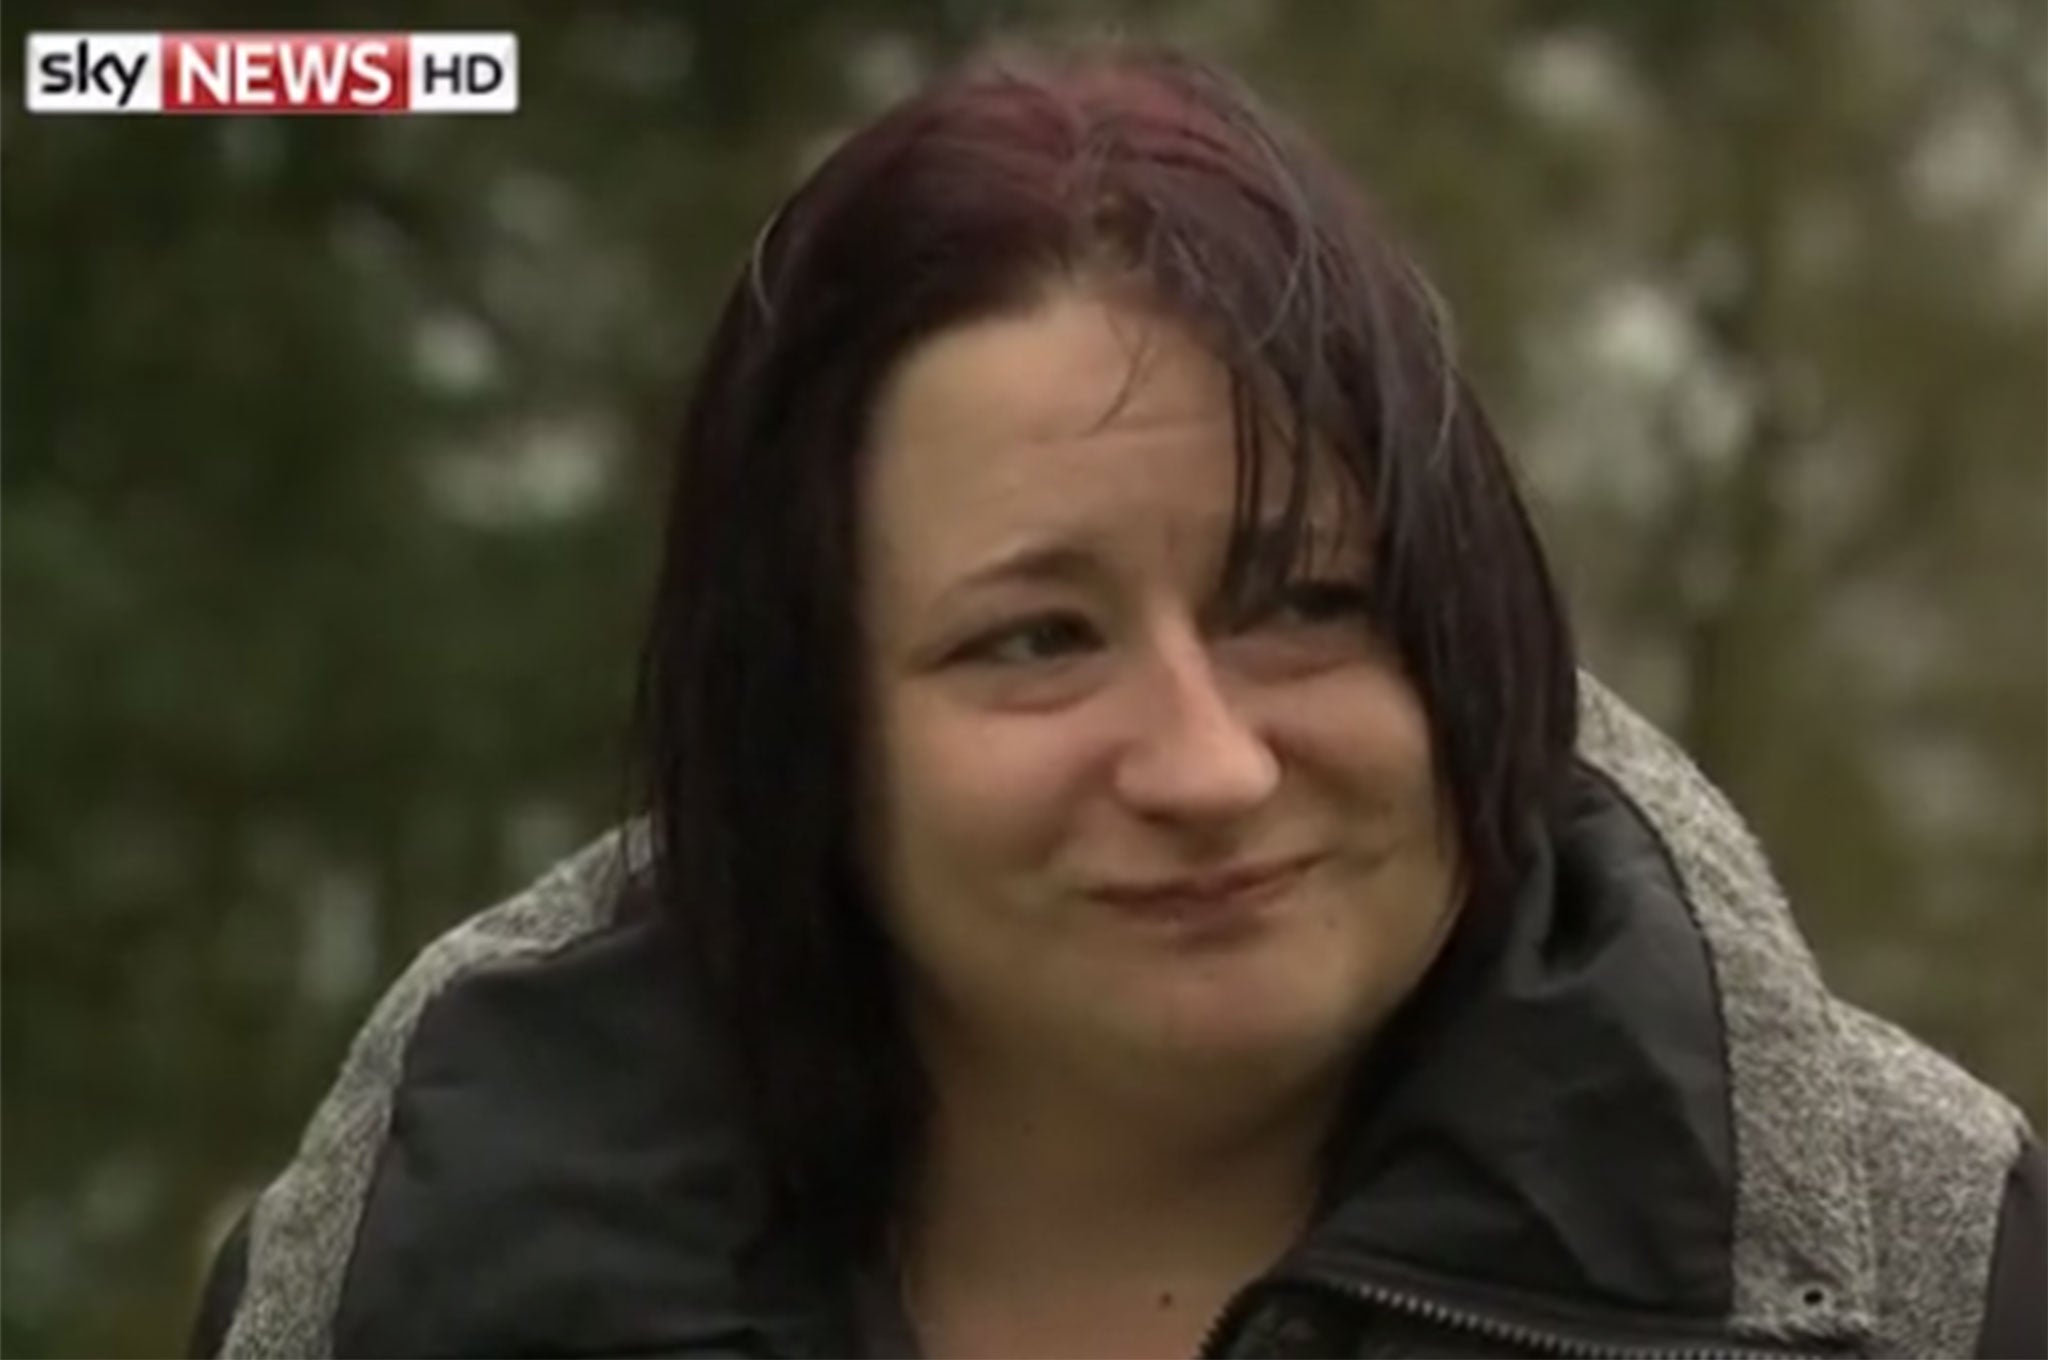 Esther Baker, 32, spoke to Sky News about sexual abuse she suffered as a child